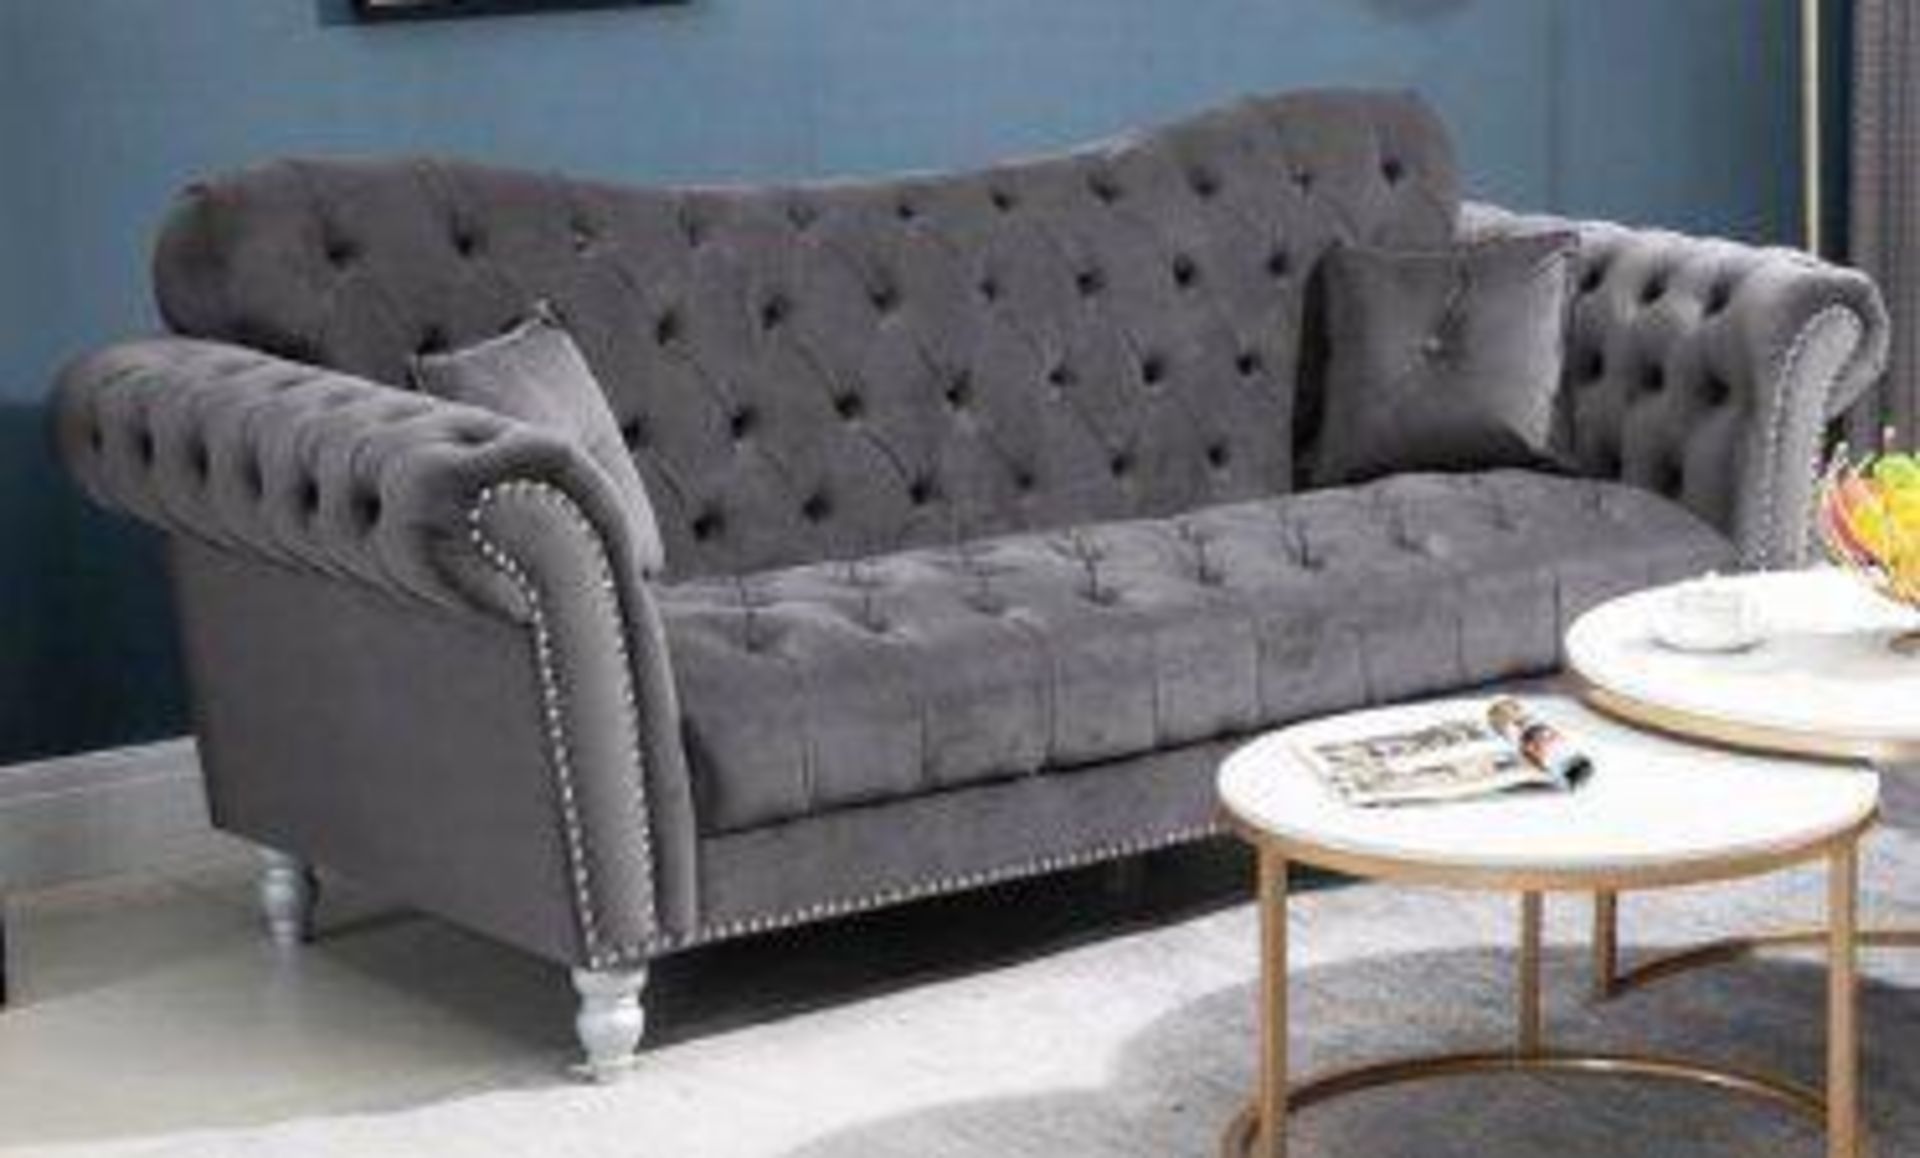 BRAND NEW & BOXED Dior Chesterfield 3 seater sofa. RRP: £999